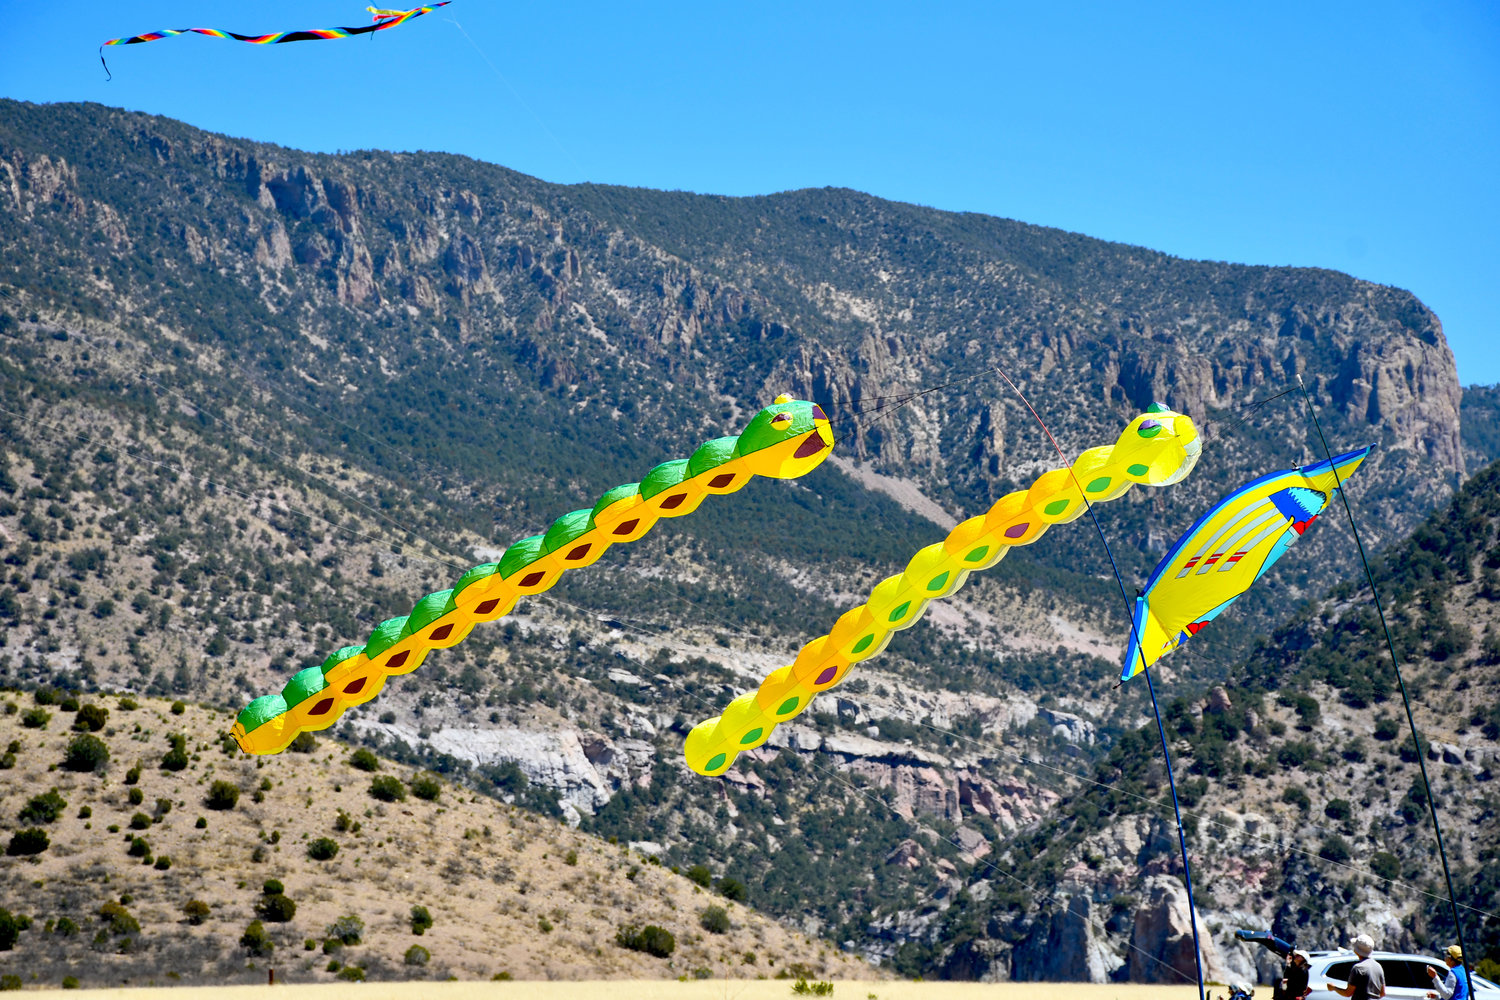 Colorful kites of all shapes and sizes show up for this annual Kite Flying Picnic.